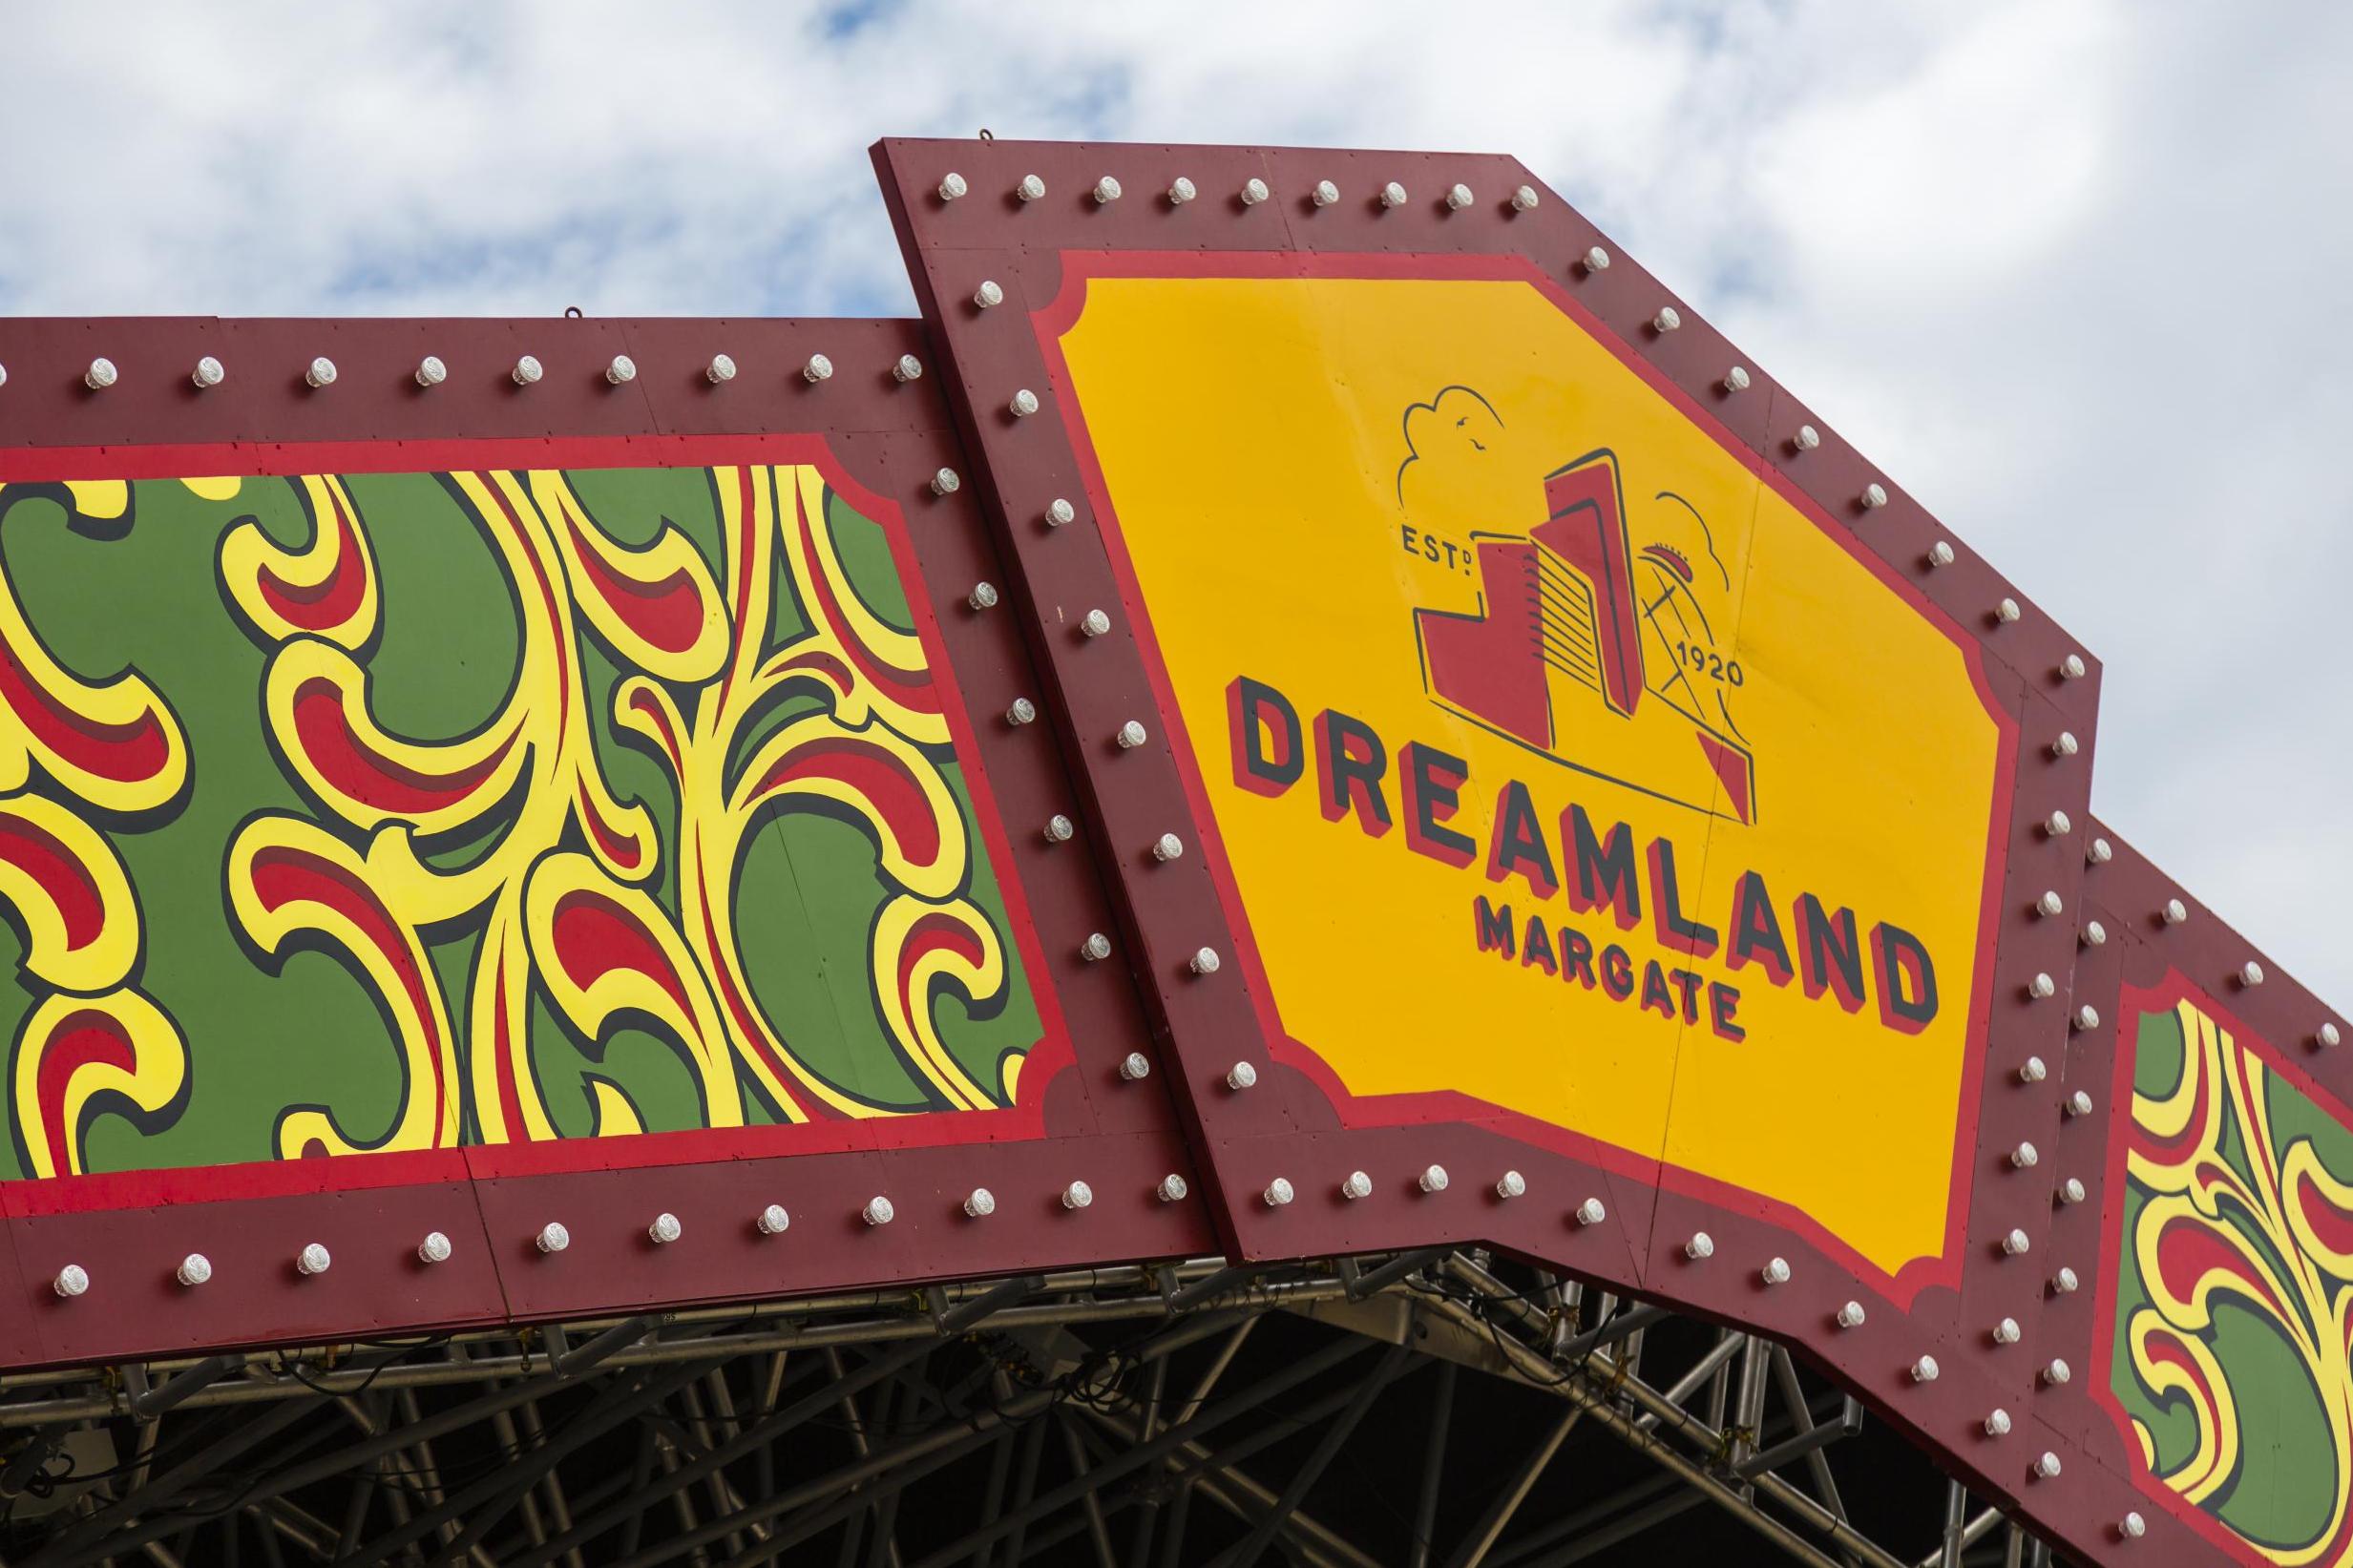 Famous bands have played on Dreamland's main stage